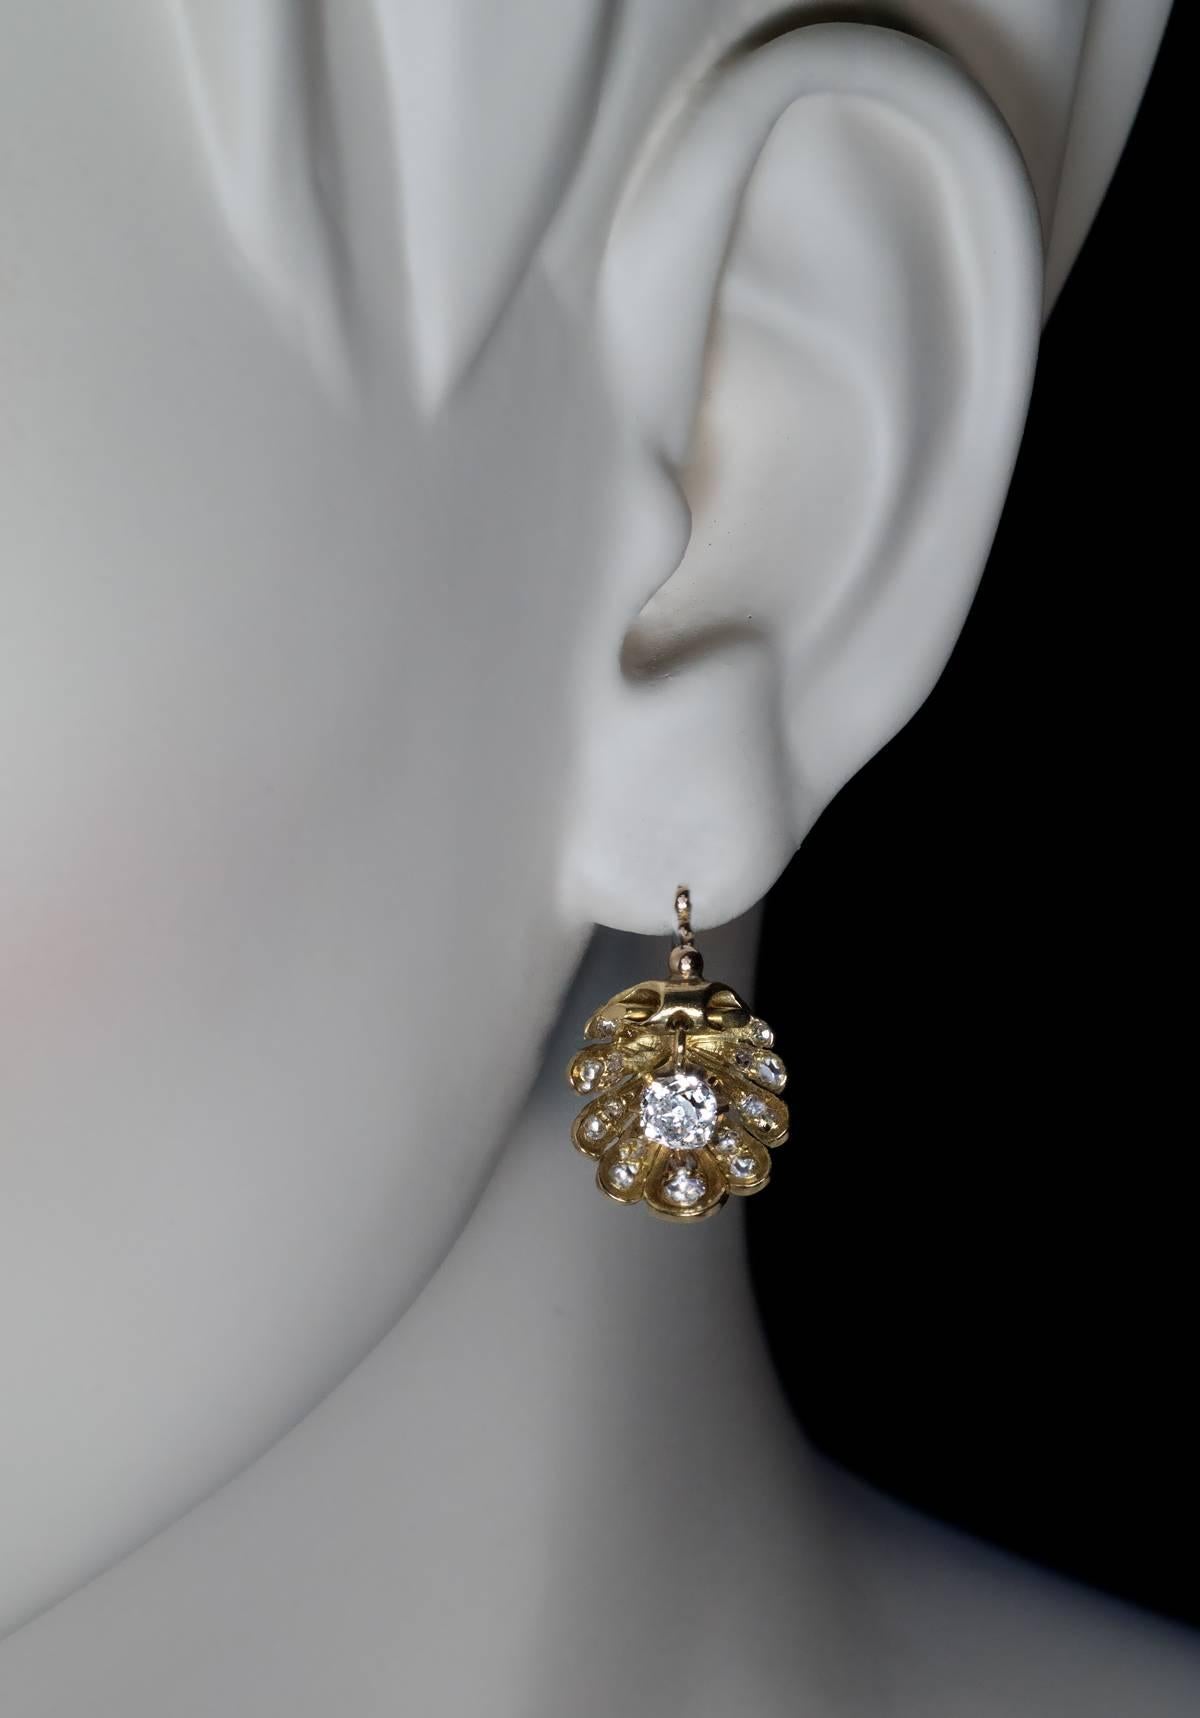 18K gold shell shaped earrings embellished with rose cut diamonds, each with a dangling cushion cut diamond (approximately 0.65 ct) in the center